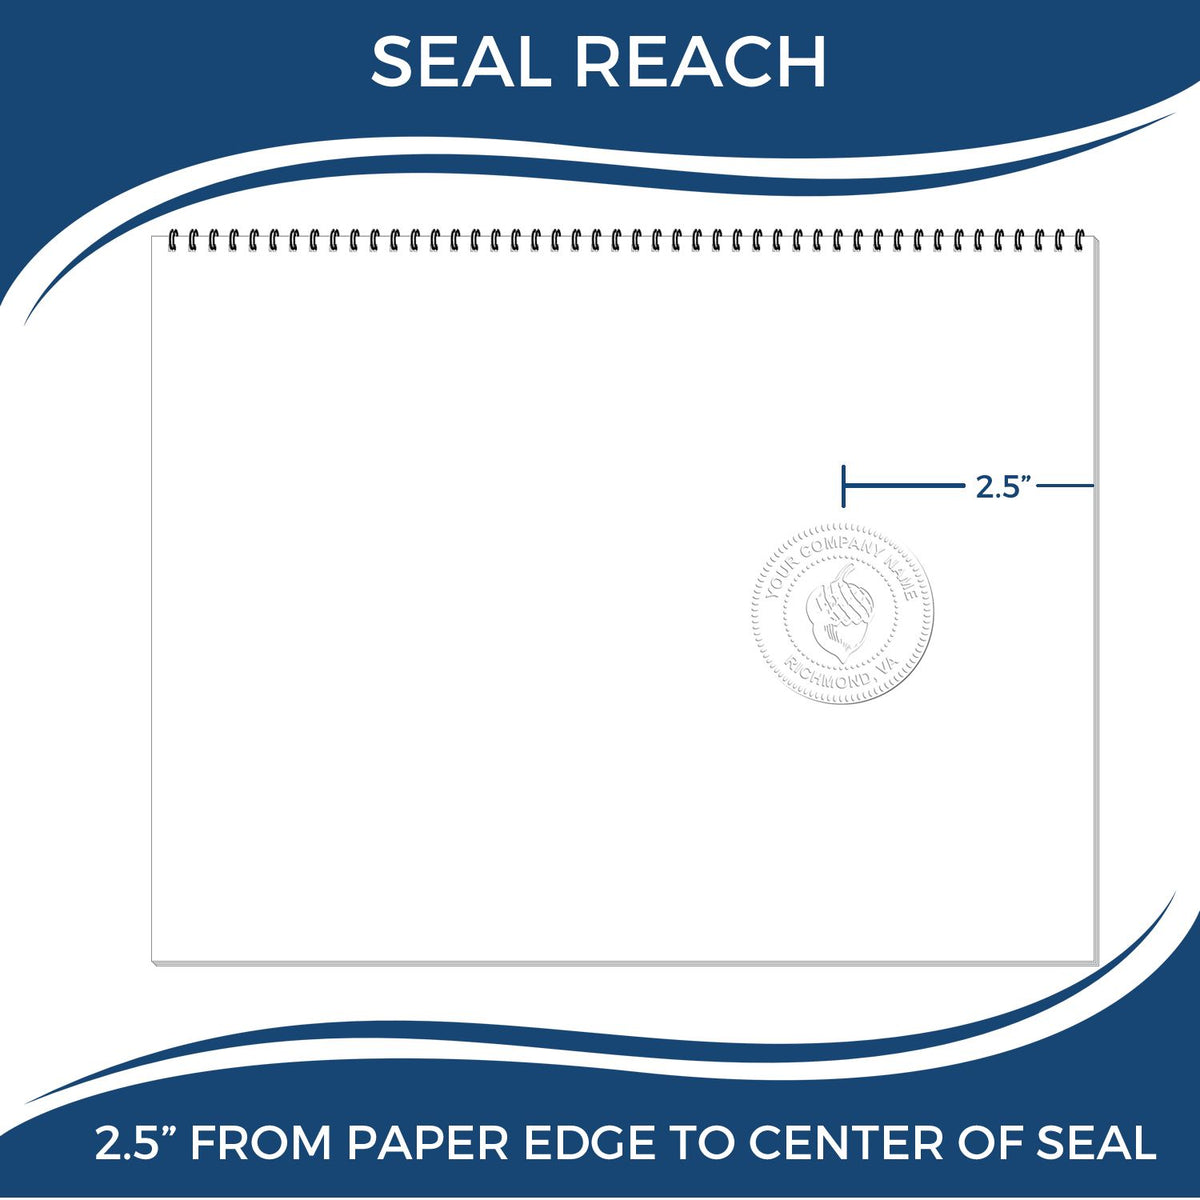 An infographic showing the seal reach which is represented by a ruler and a miniature seal image of the State of Guam Long Reach Architectural Embossing Seal